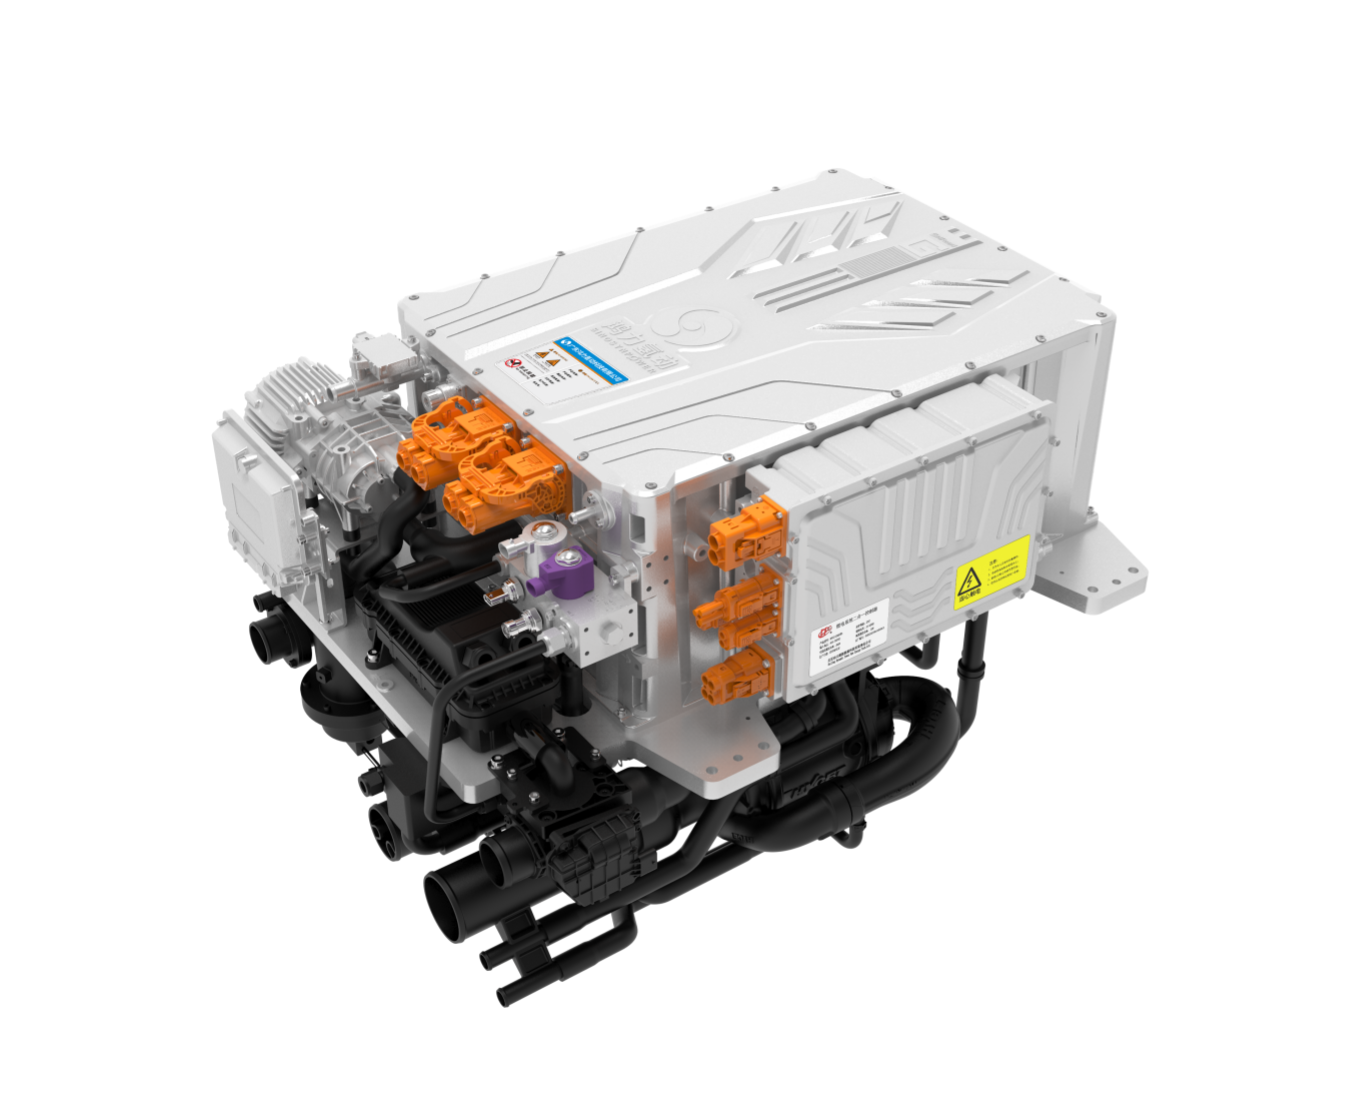 SynRoad G80 Fuel cell System